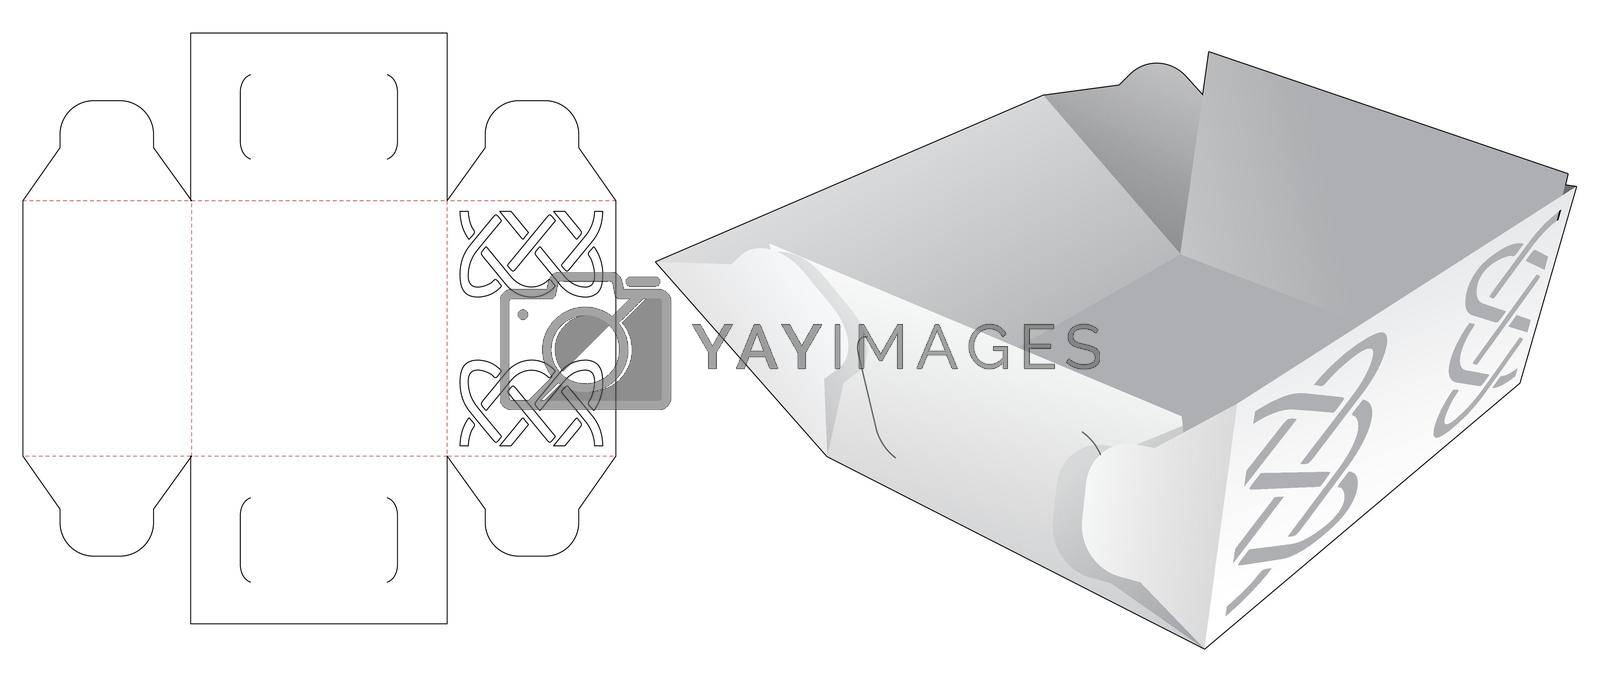 Royalty free image of folding bowl with stenciled line die cut template by valueinvestor